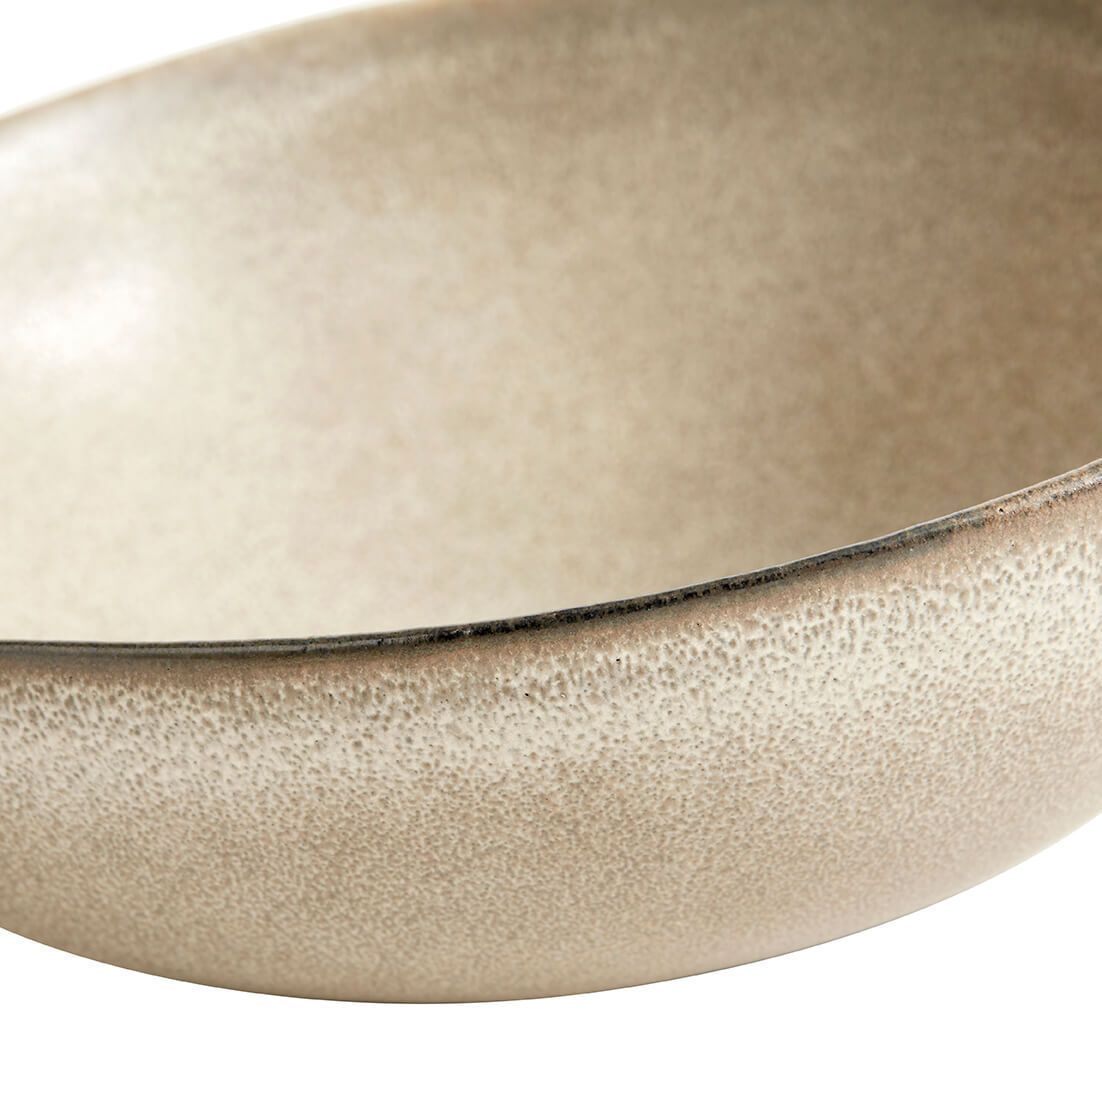 Muubs Mame musli Bowl Oyster, 14,5 cm